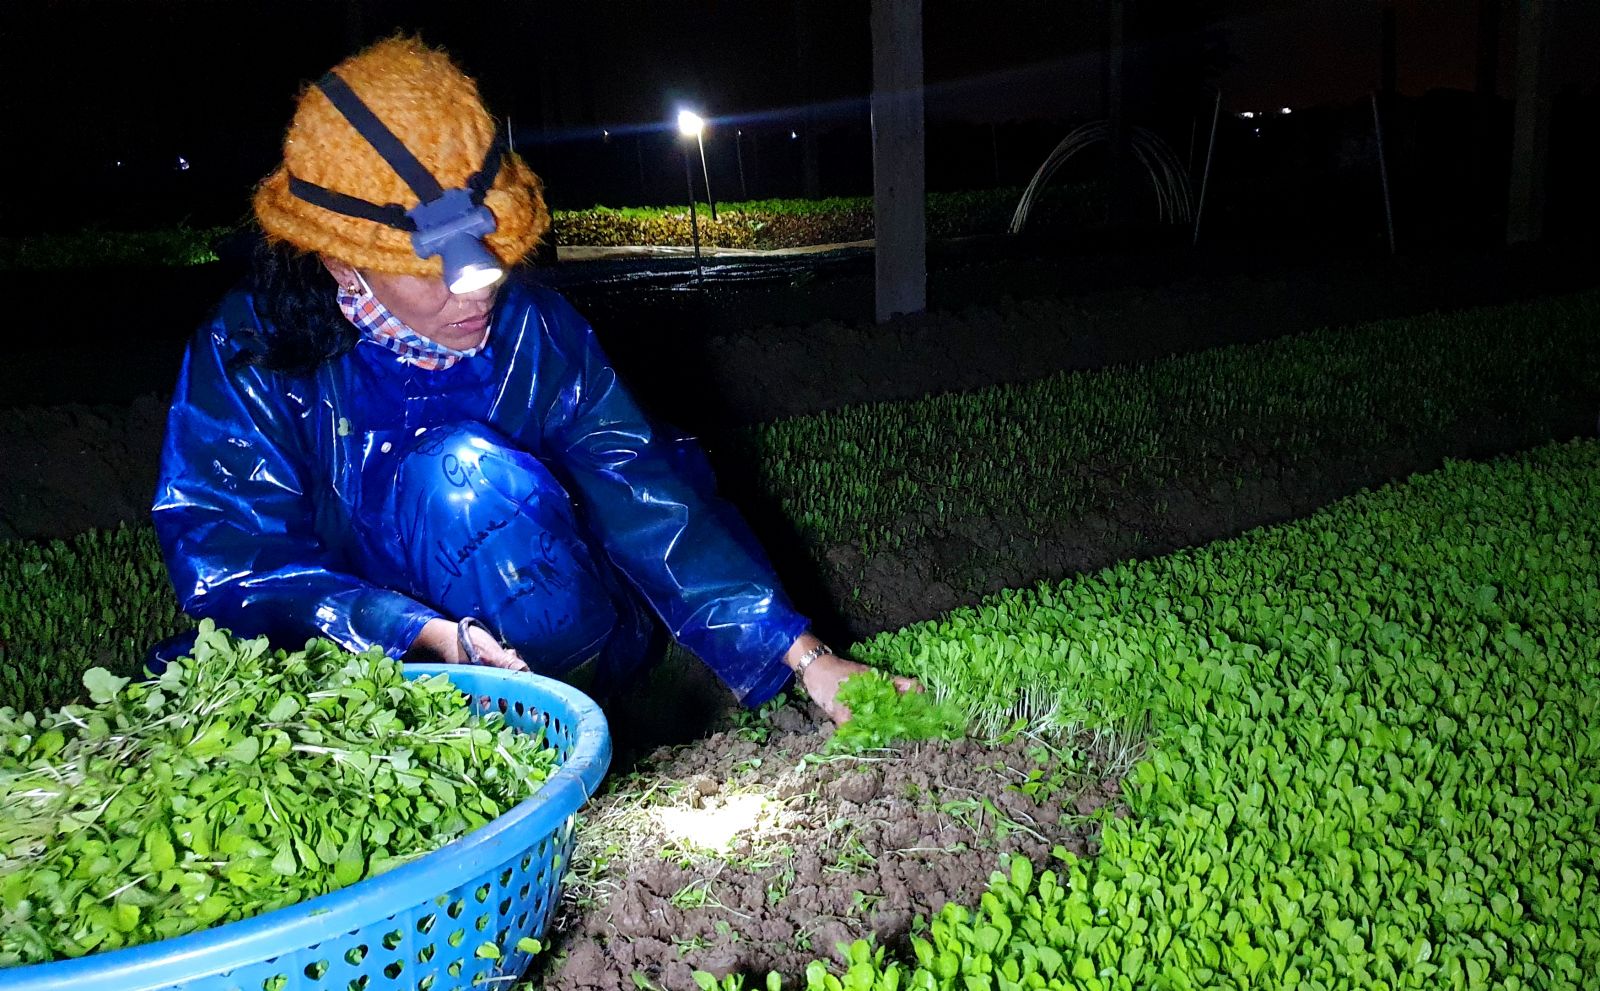 Mrs. Huong and many other vegetable growers often leave their homes at around 11:00 p.m., to harvest vegetables